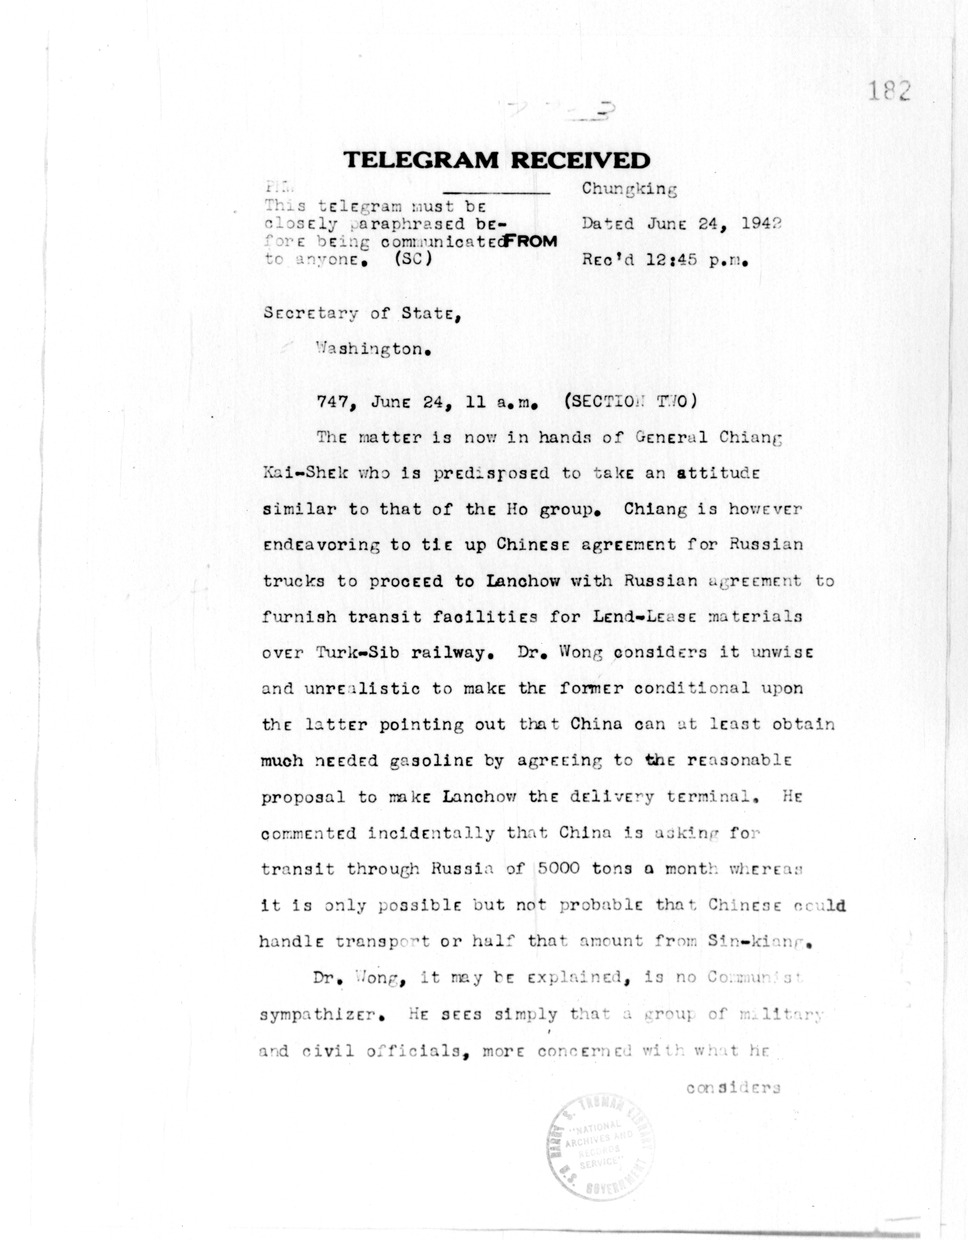 Telegram from Clarence E. Gauss to Secretary of State Cordell Hull